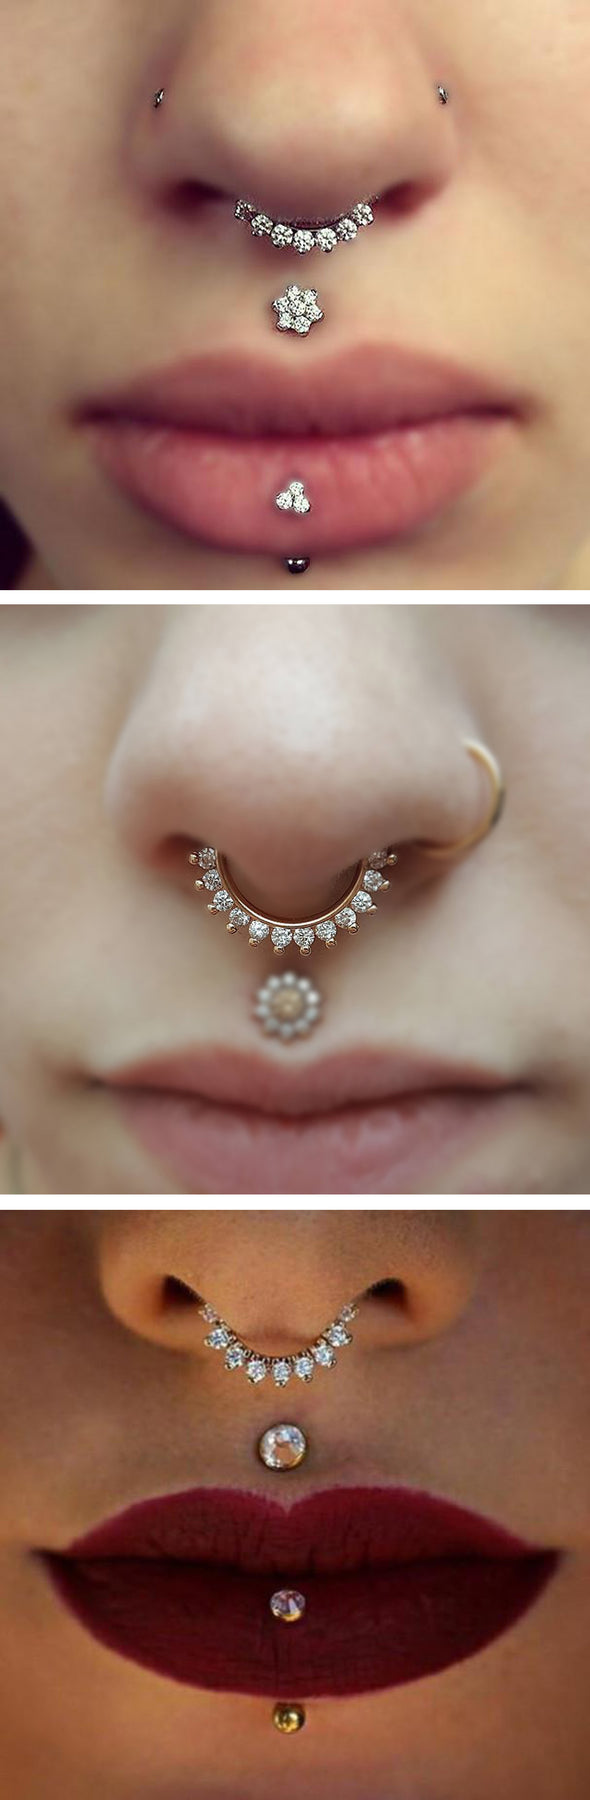 satuwilhelmiina: saw these beautiful earrings and... | everything sucks  forever